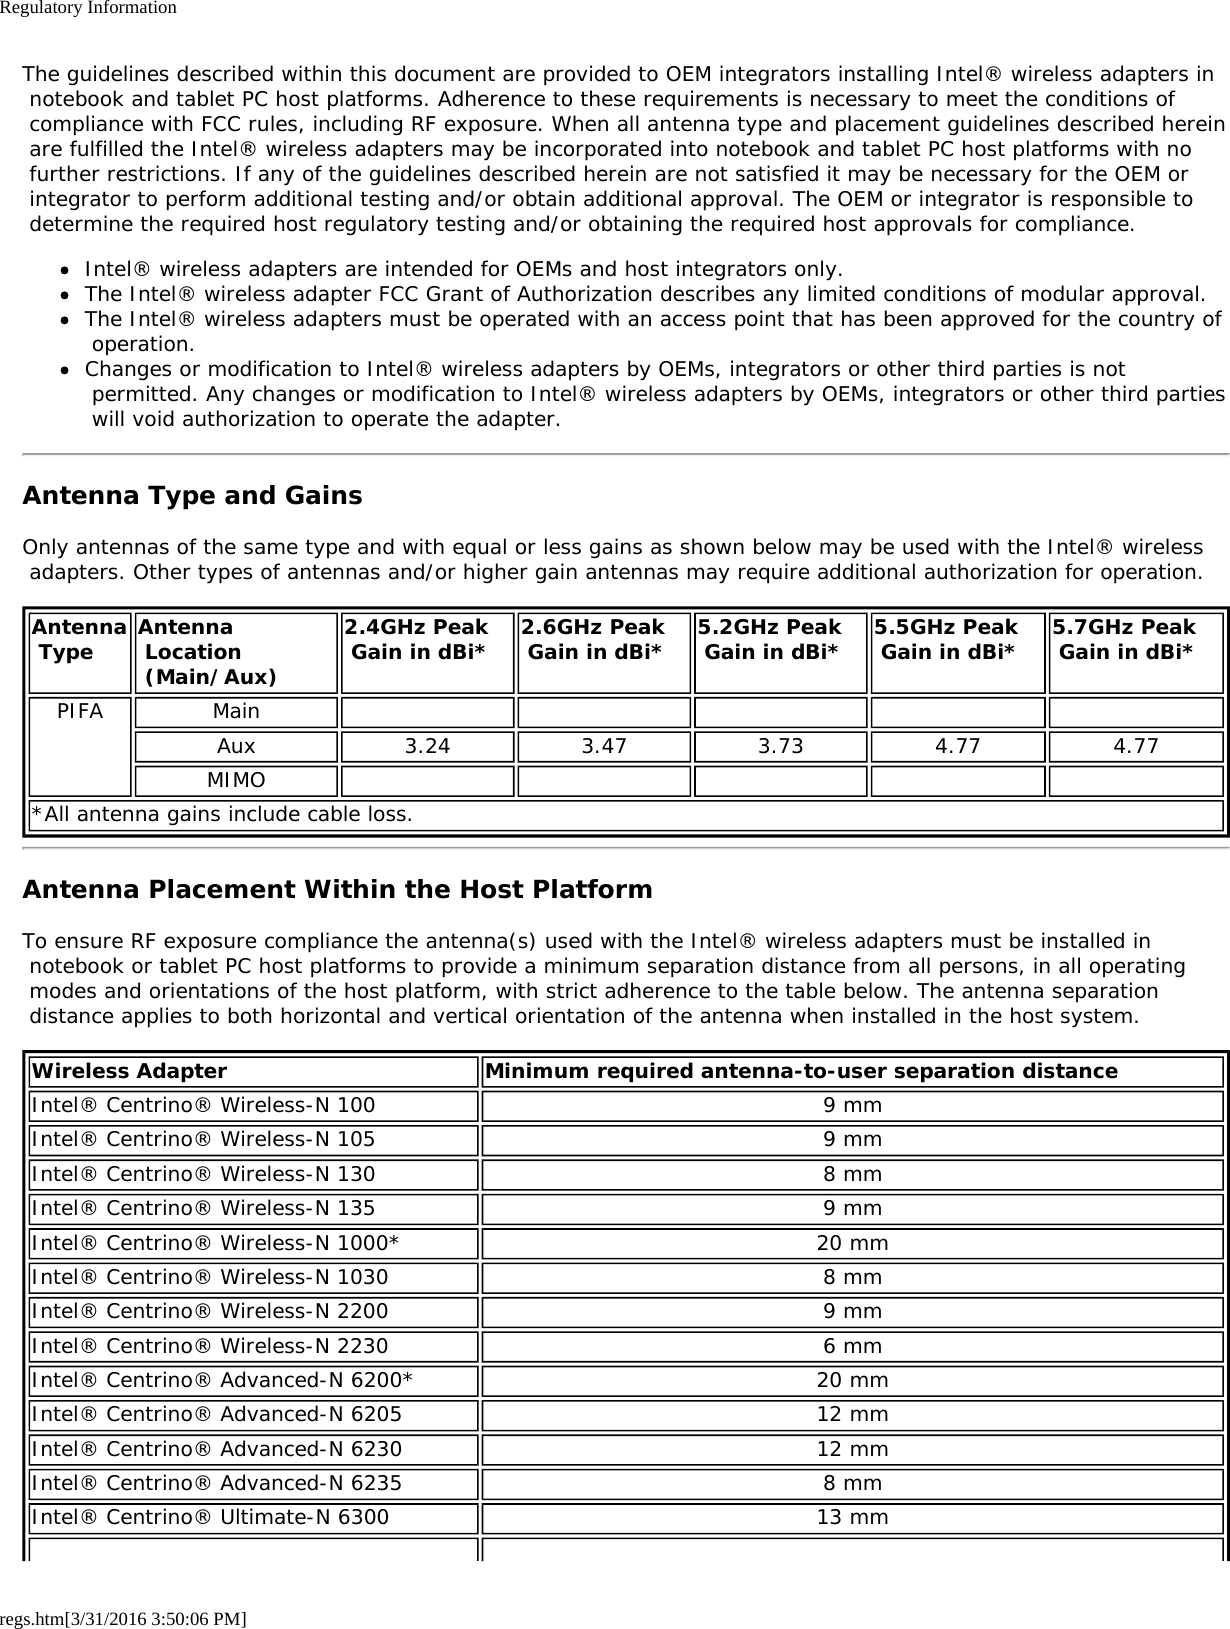 Regulatory Informationregs.htm[3/31/2016 3:50:06 PM]The guidelines described within this document are provided to OEM integrators installing Intel® wireless adapters in notebook and tablet PC host platforms. Adherence to these requirements is necessary to meet the conditions of compliance with FCC rules, including RF exposure. When all antenna type and placement guidelines described herein are fulfilled the Intel® wireless adapters may be incorporated into notebook and tablet PC host platforms with no further restrictions. If any of the guidelines described herein are not satisfied it may be necessary for the OEM or integrator to perform additional testing and/or obtain additional approval. The OEM or integrator is responsible to determine the required host regulatory testing and/or obtaining the required host approvals for compliance.Intel® wireless adapters are intended for OEMs and host integrators only.The Intel® wireless adapter FCC Grant of Authorization describes any limited conditions of modular approval.The Intel® wireless adapters must be operated with an access point that has been approved for the country of operation.Changes or modification to Intel® wireless adapters by OEMs, integrators or other third parties is not permitted. Any changes or modification to Intel® wireless adapters by OEMs, integrators or other third parties will void authorization to operate the adapter.Antenna Type and GainsOnly antennas of the same type and with equal or less gains as shown below may be used with the Intel® wireless adapters. Other types of antennas and/or higher gain antennas may require additional authorization for operation.Antenna Type Antenna Location (Main/Aux)2.4GHz Peak Gain in dBi* 2.6GHz Peak Gain in dBi* 5.2GHz Peak Gain in dBi* 5.5GHz Peak Gain in dBi* 5.7GHz Peak Gain in dBi*PIFA MainAux 3.24 3.47 3.73 4.77 4.77MIMO*All antenna gains include cable loss.Antenna Placement Within the Host PlatformTo ensure RF exposure compliance the antenna(s) used with the Intel® wireless adapters must be installed in notebook or tablet PC host platforms to provide a minimum separation distance from all persons, in all operating modes and orientations of the host platform, with strict adherence to the table below. The antenna separation distance applies to both horizontal and vertical orientation of the antenna when installed in the host system.Wireless Adapter Minimum required antenna-to-user separation distanceIntel® Centrino® Wireless-N 100 9 mmIntel® Centrino® Wireless-N 105 9 mmIntel® Centrino® Wireless-N 130 8 mmIntel® Centrino® Wireless-N 135 9 mmIntel® Centrino® Wireless-N 1000* 20 mmIntel® Centrino® Wireless-N 1030 8 mmIntel® Centrino® Wireless-N 2200 9 mmIntel® Centrino® Wireless-N 2230 6 mmIntel® Centrino® Advanced-N 6200* 20 mmIntel® Centrino® Advanced-N 6205 12 mmIntel® Centrino® Advanced-N 6230 12 mmIntel® Centrino® Advanced-N 6235 8 mmIntel® Centrino® Ultimate-N 6300 13 mm